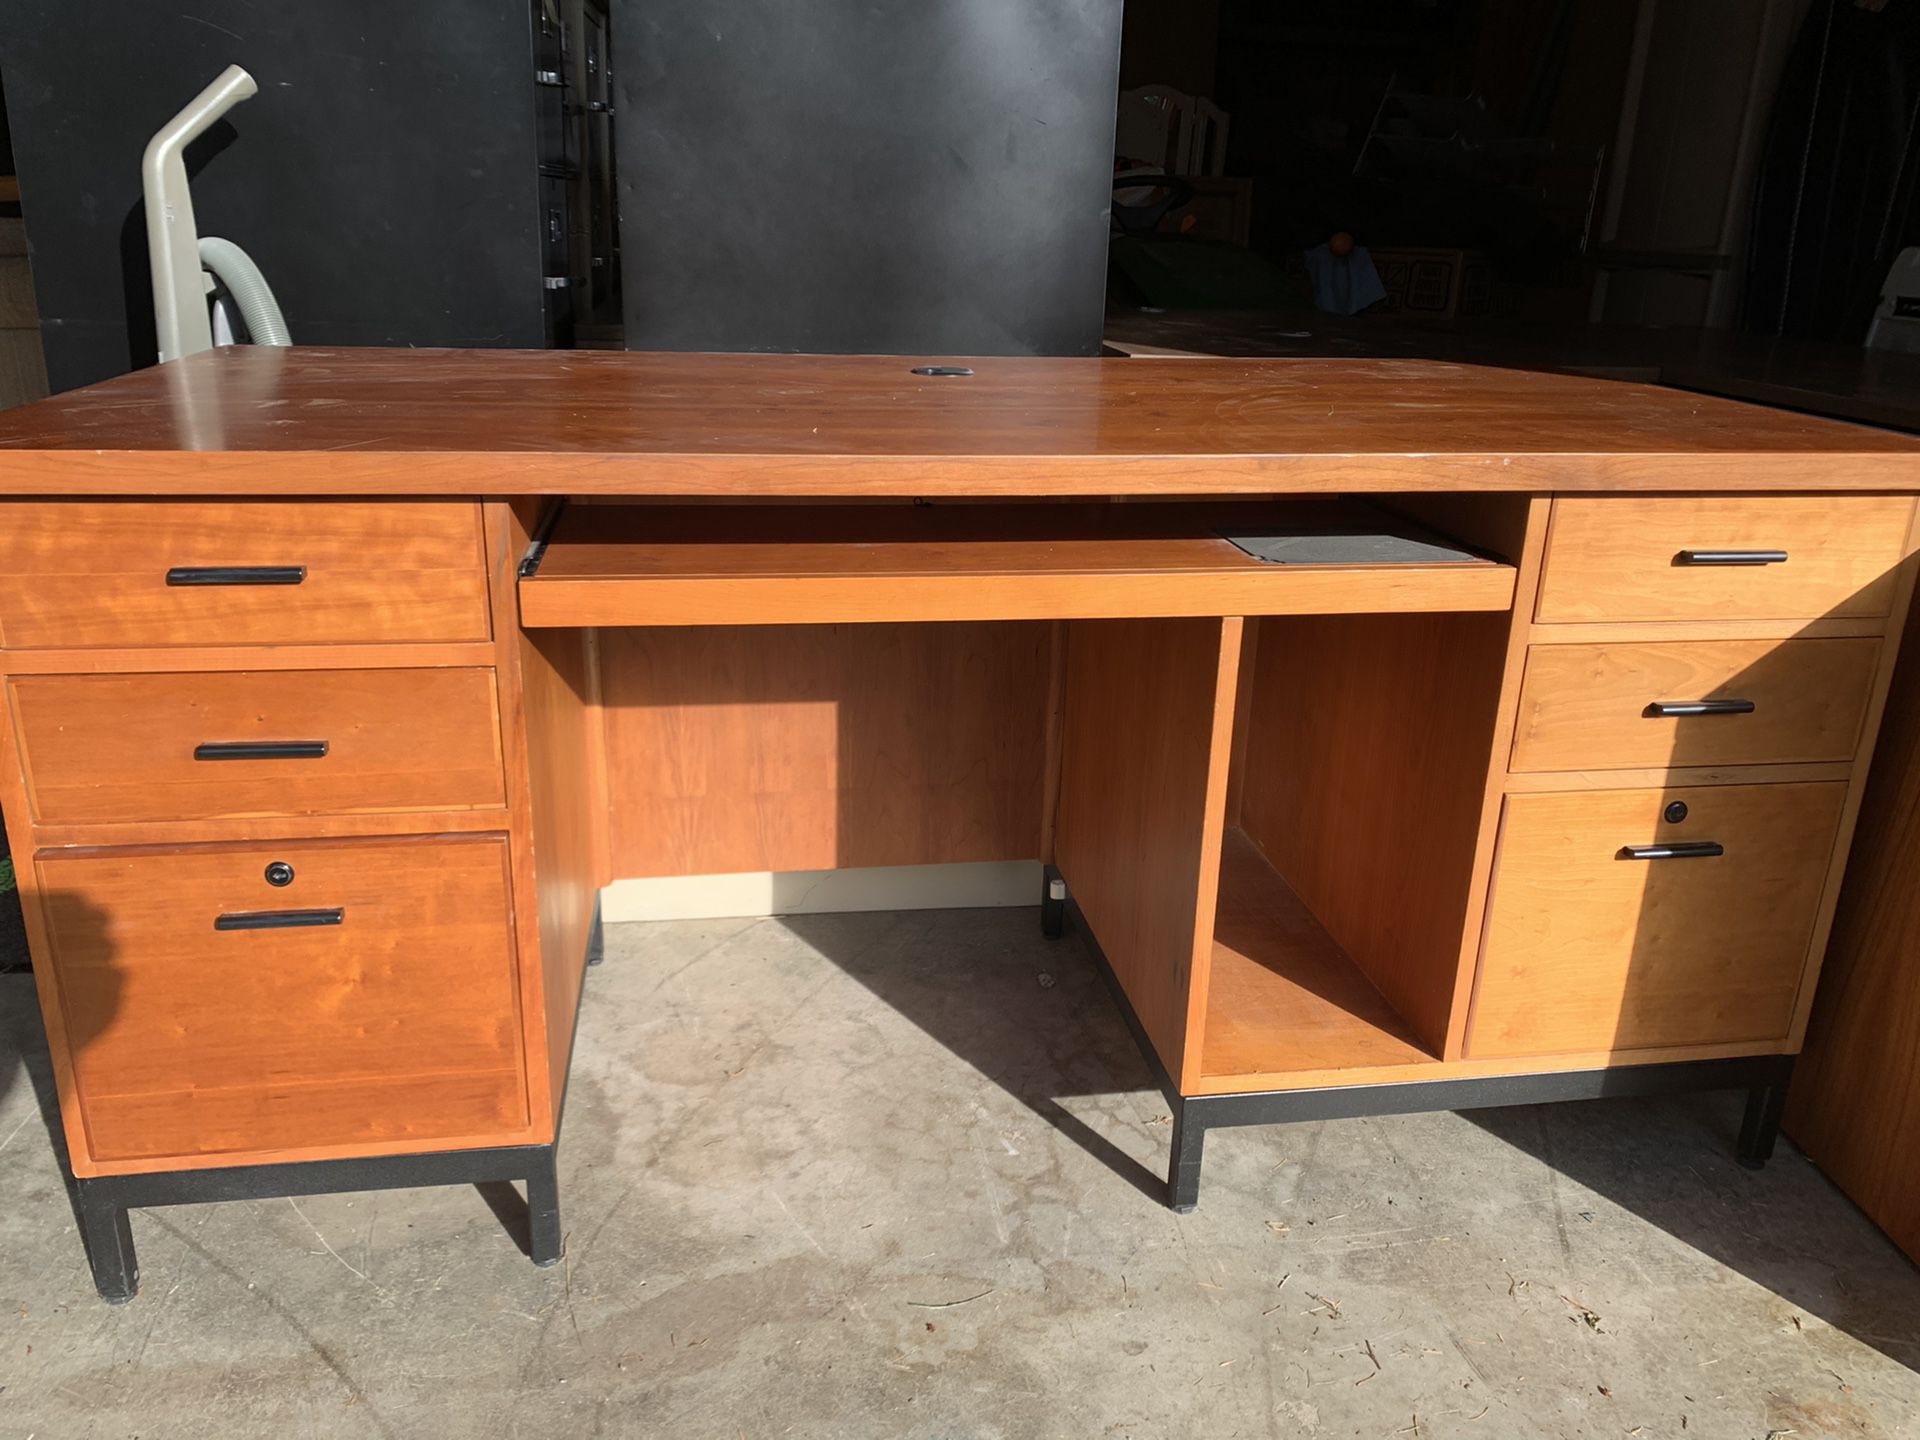 wood desk and lateral file cabinet. Good condition as is or perfect to refinish